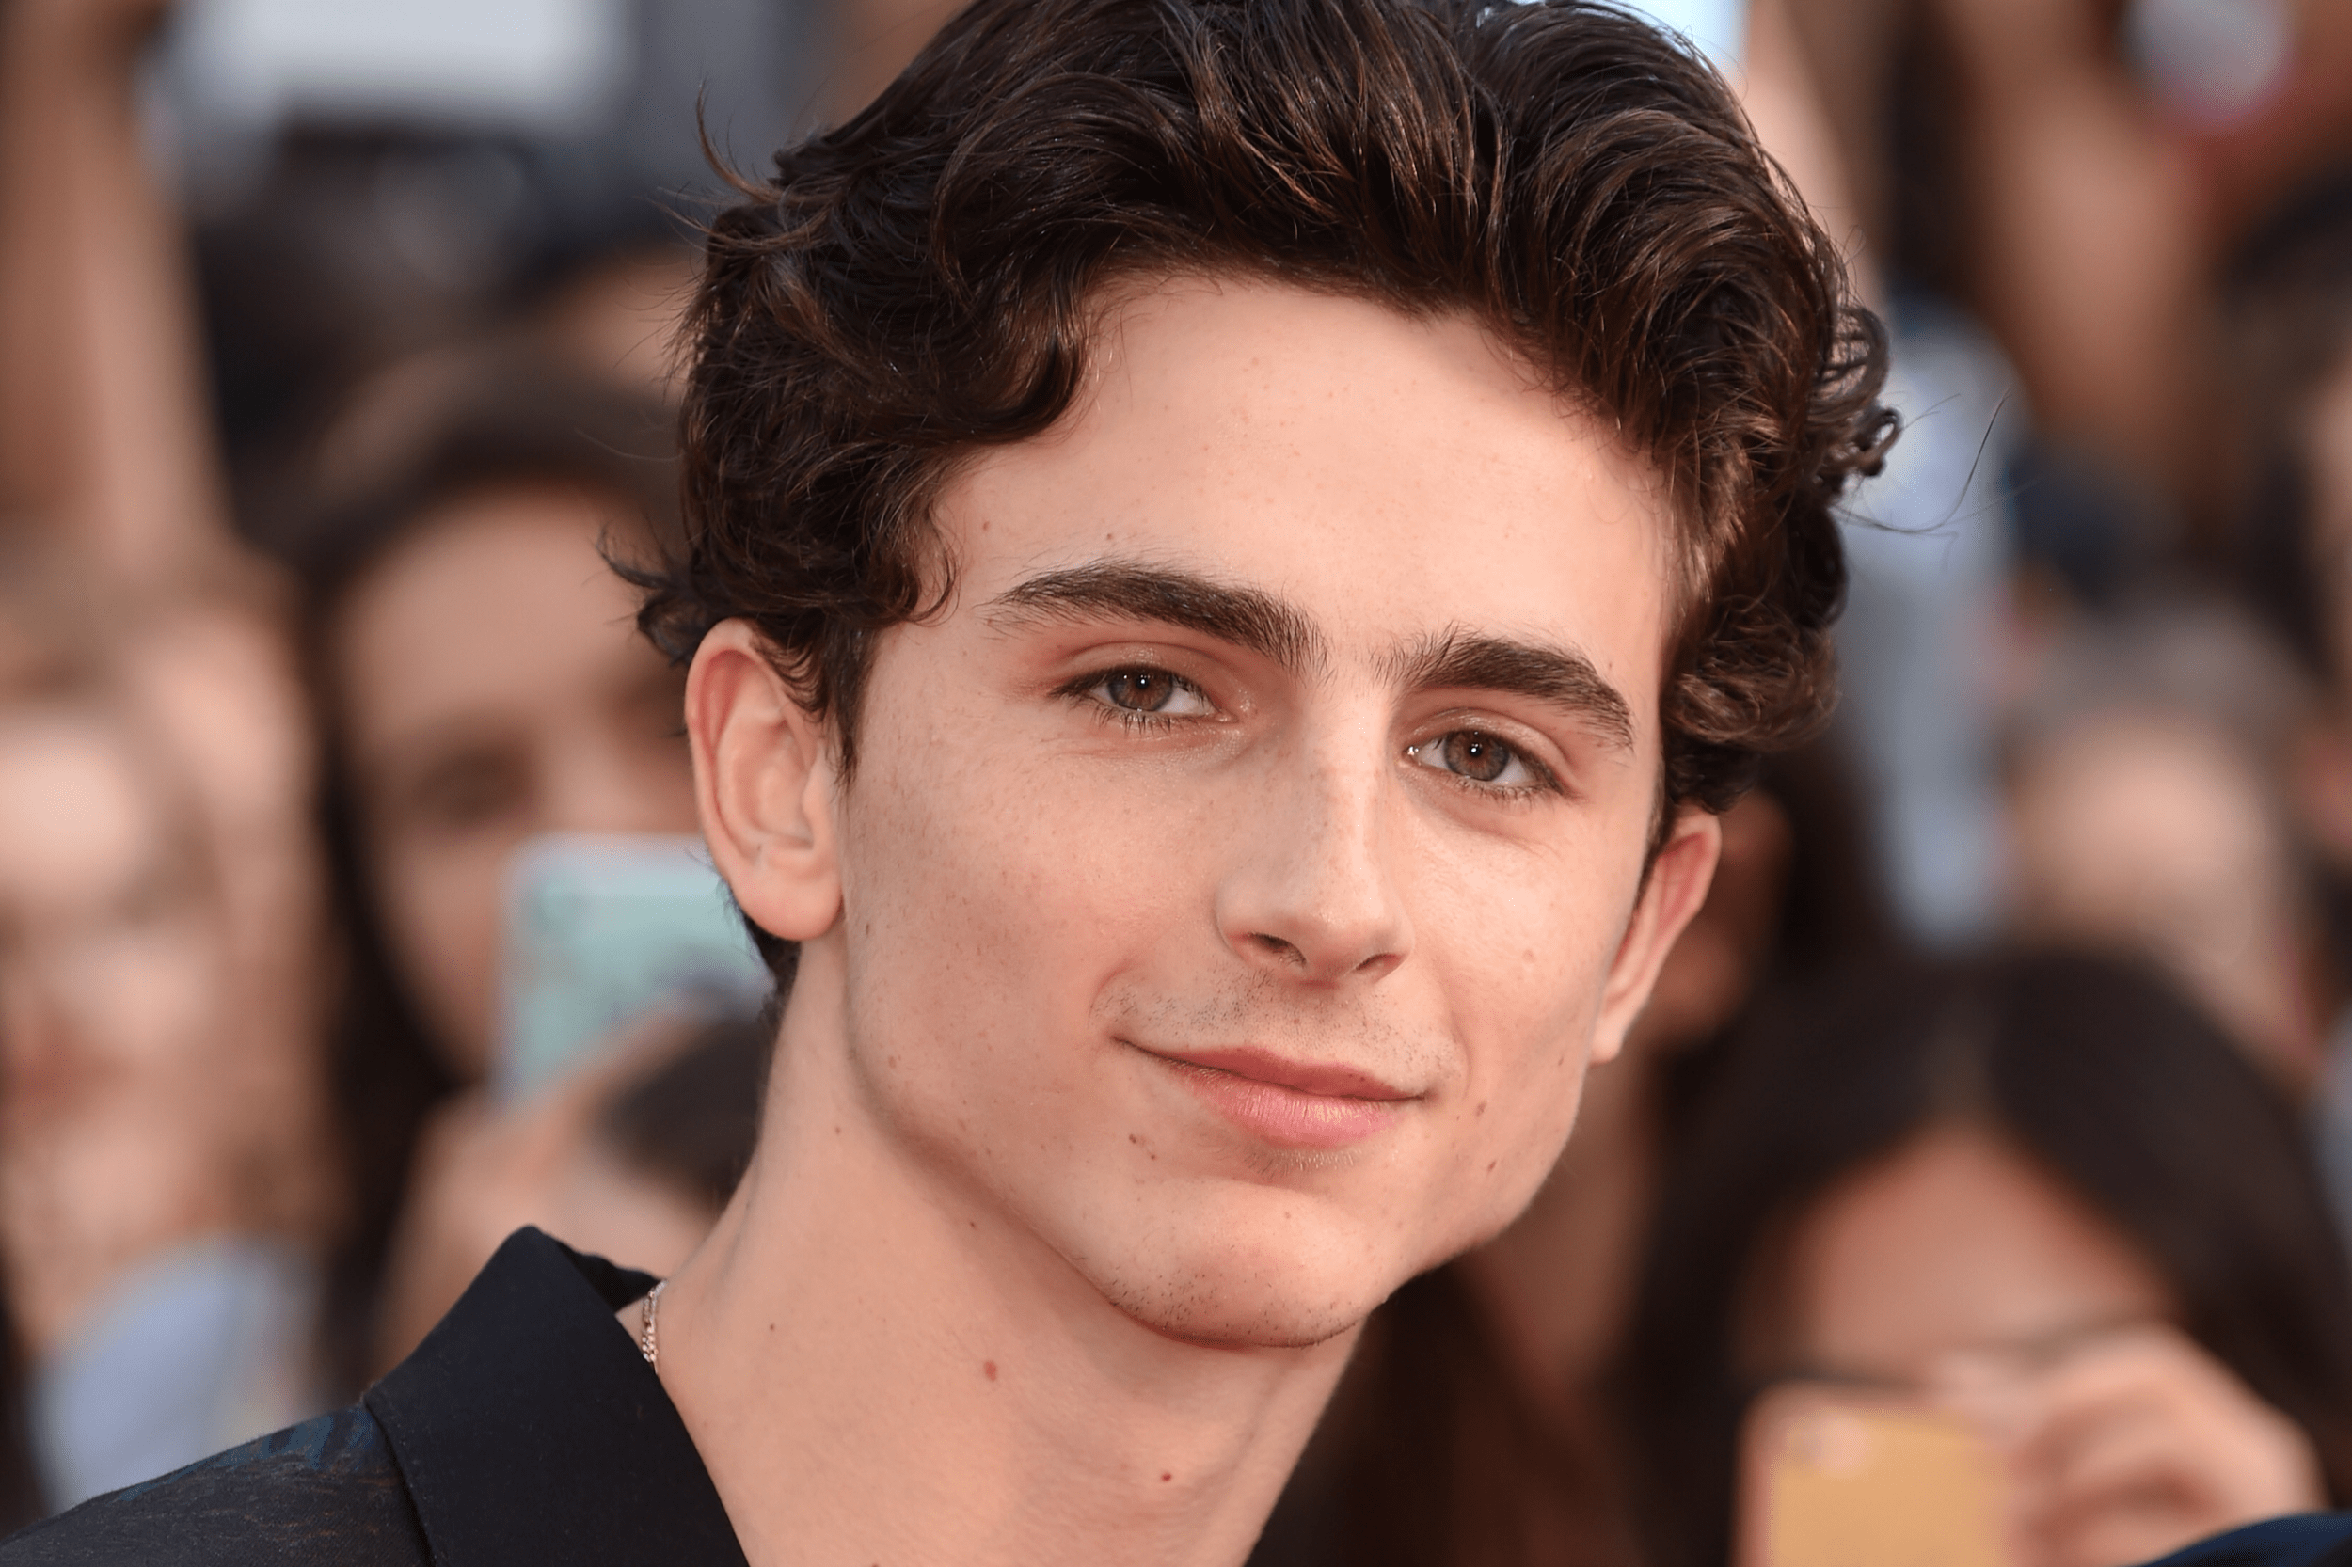 Male Celebrity Inspired Skincare Routines for Glowing Skin - VIVALUI